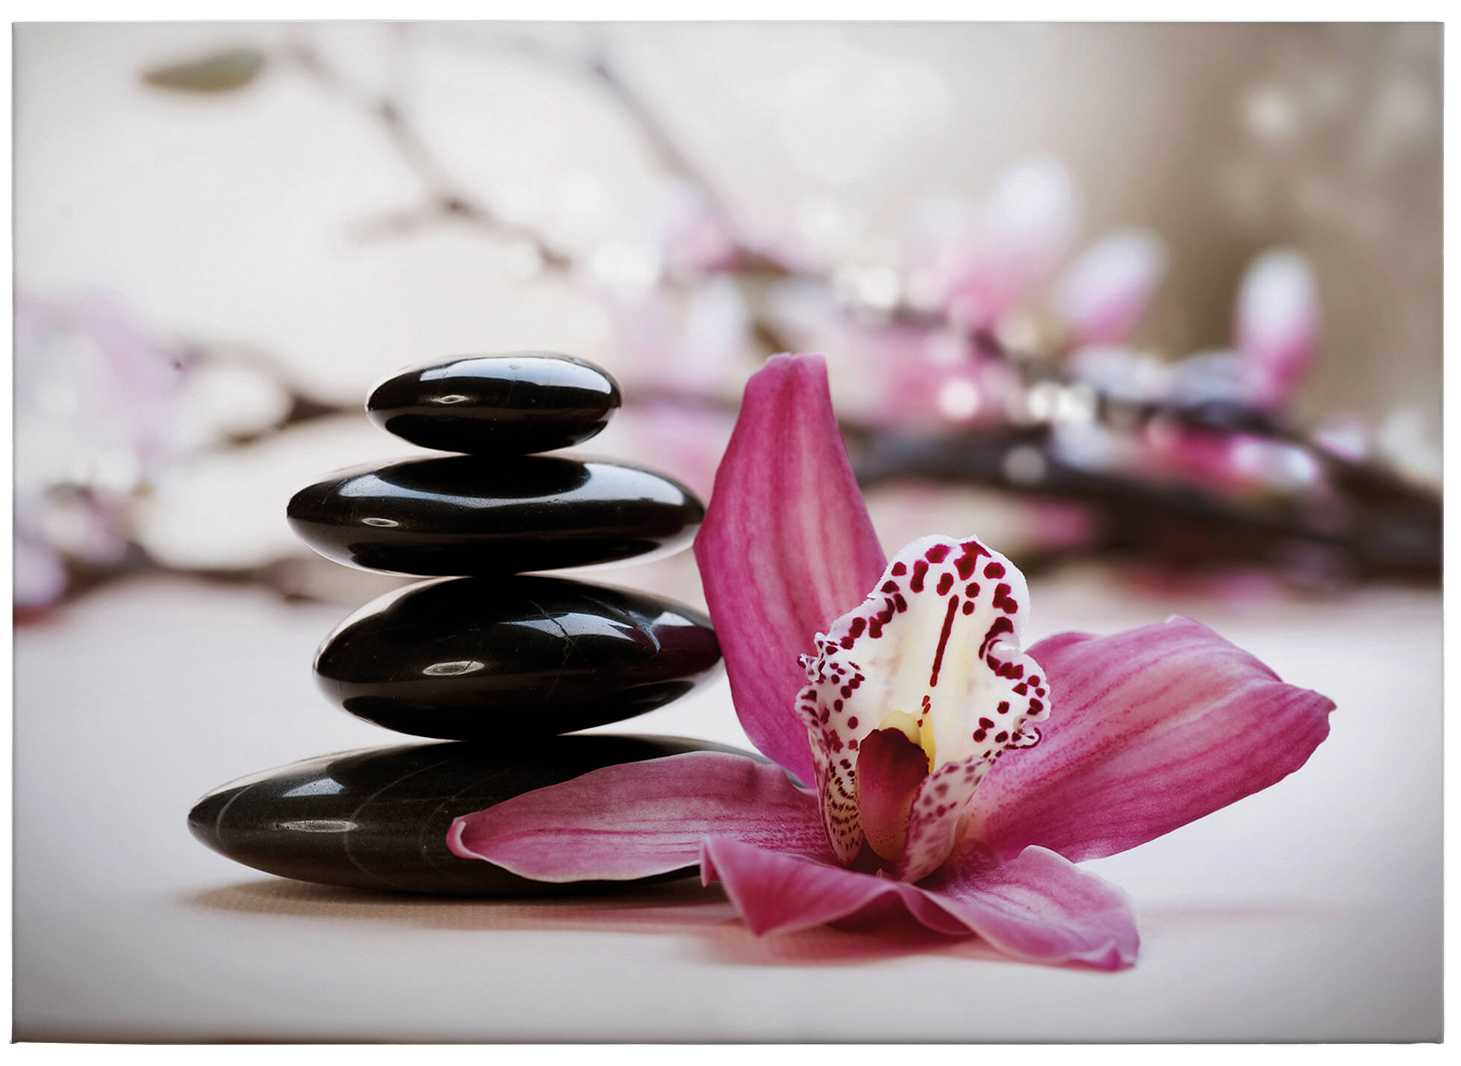             Canvas print wellness design orchid and massage stones
        